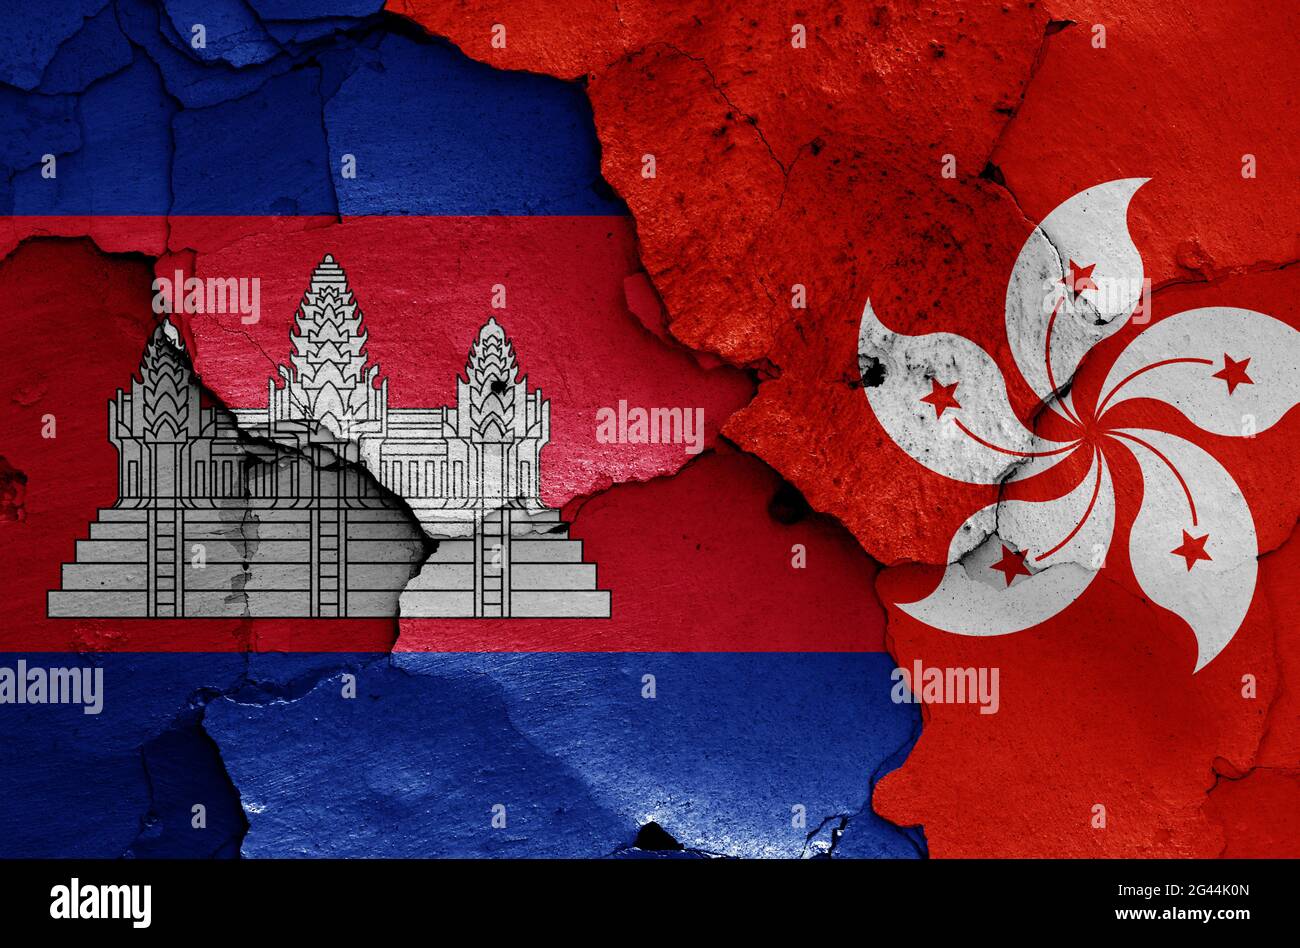 Flags of Cambodia and Hong Kong painted on cracked wall Stock Photo